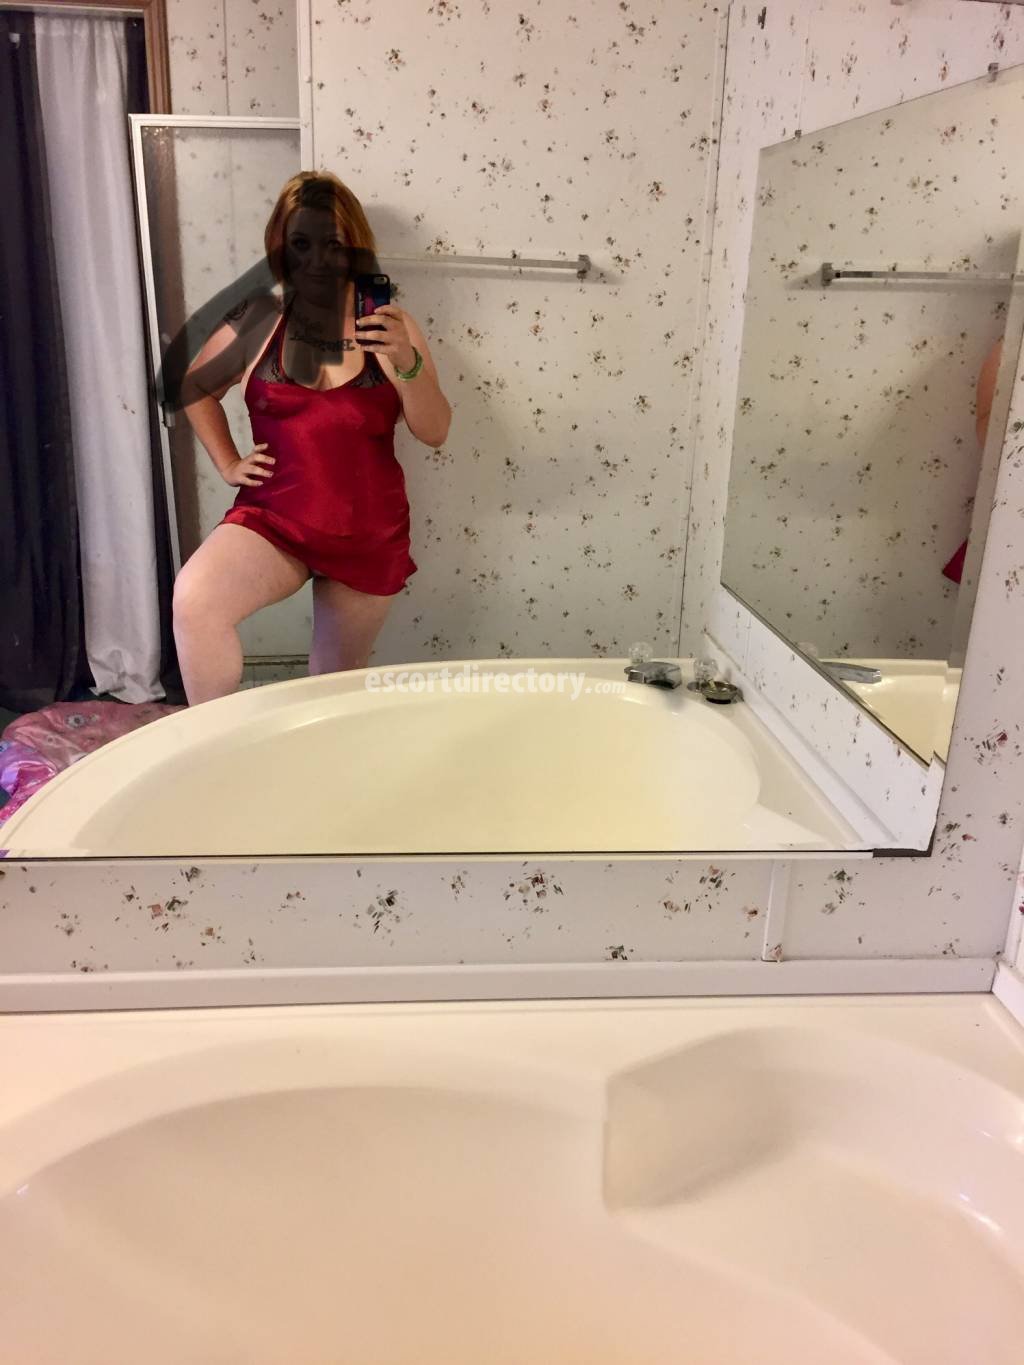 Onlyfans knoxville tn